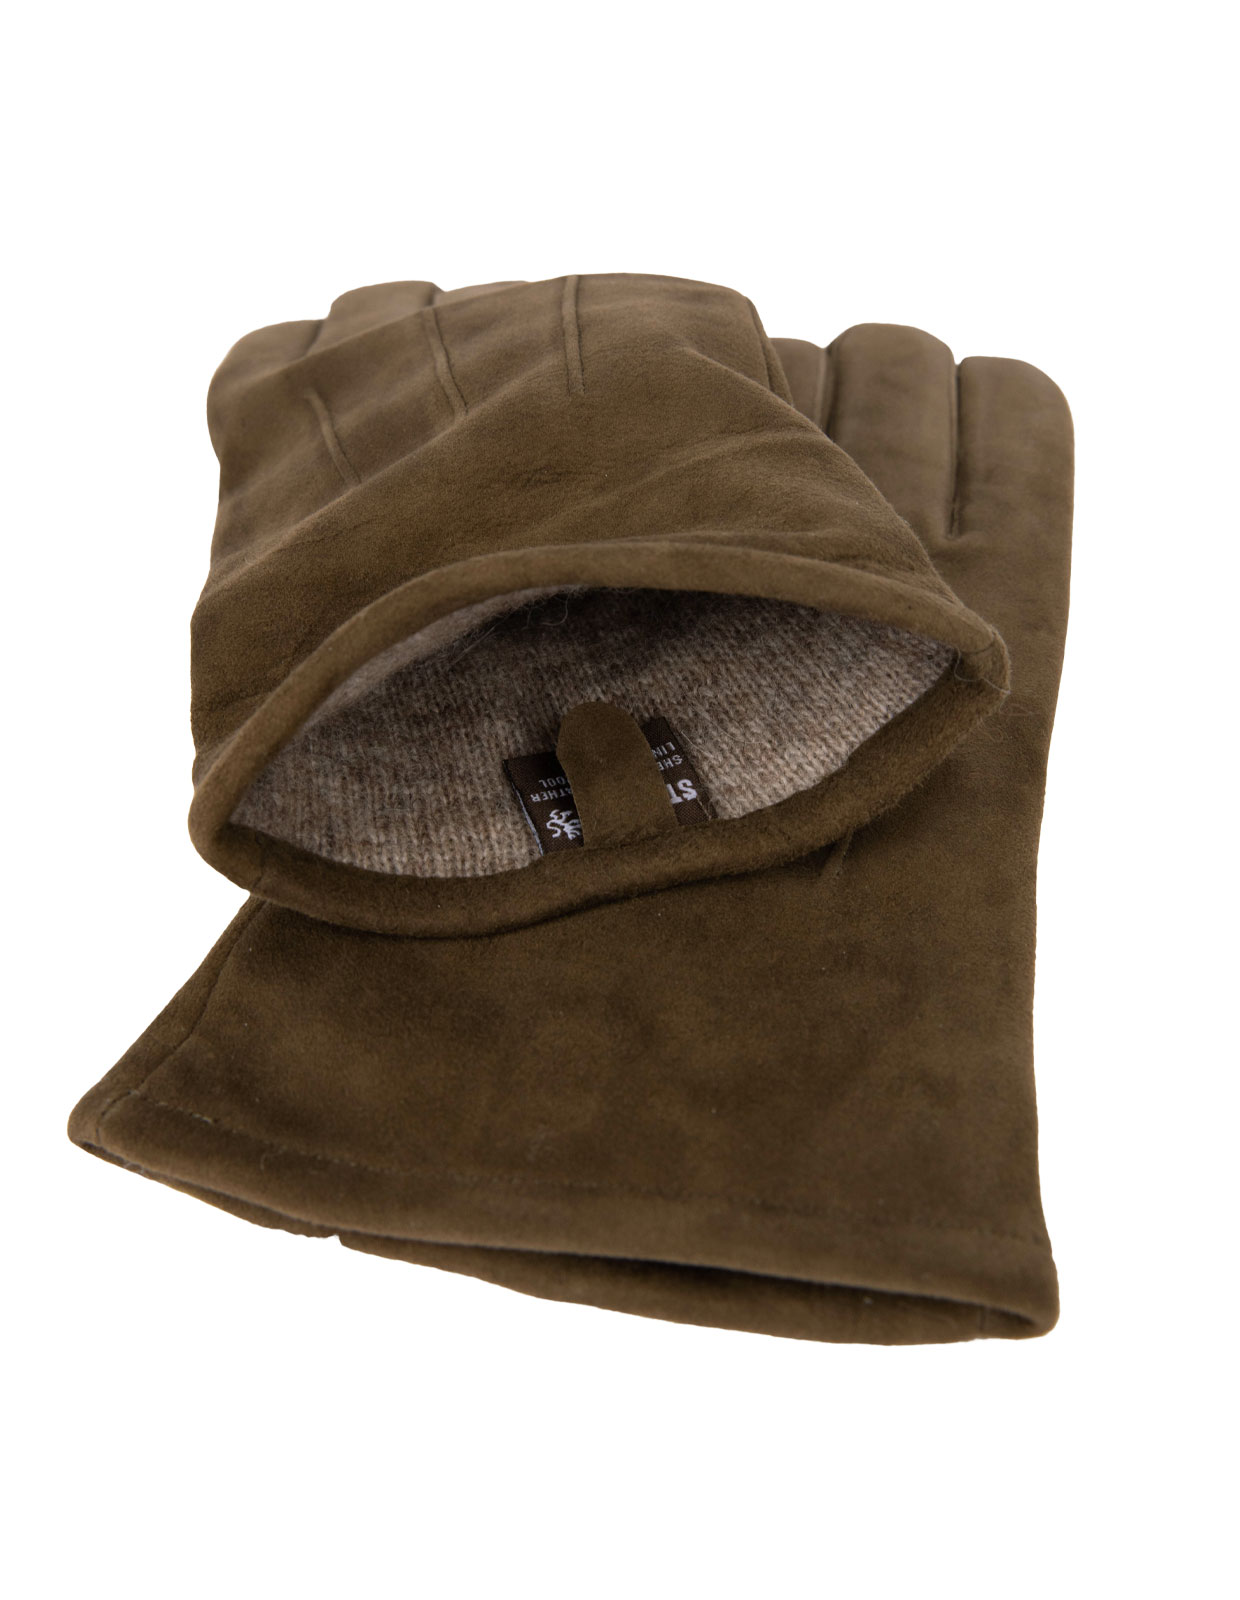 Classic Suede Gloves Olive Green Stl 8